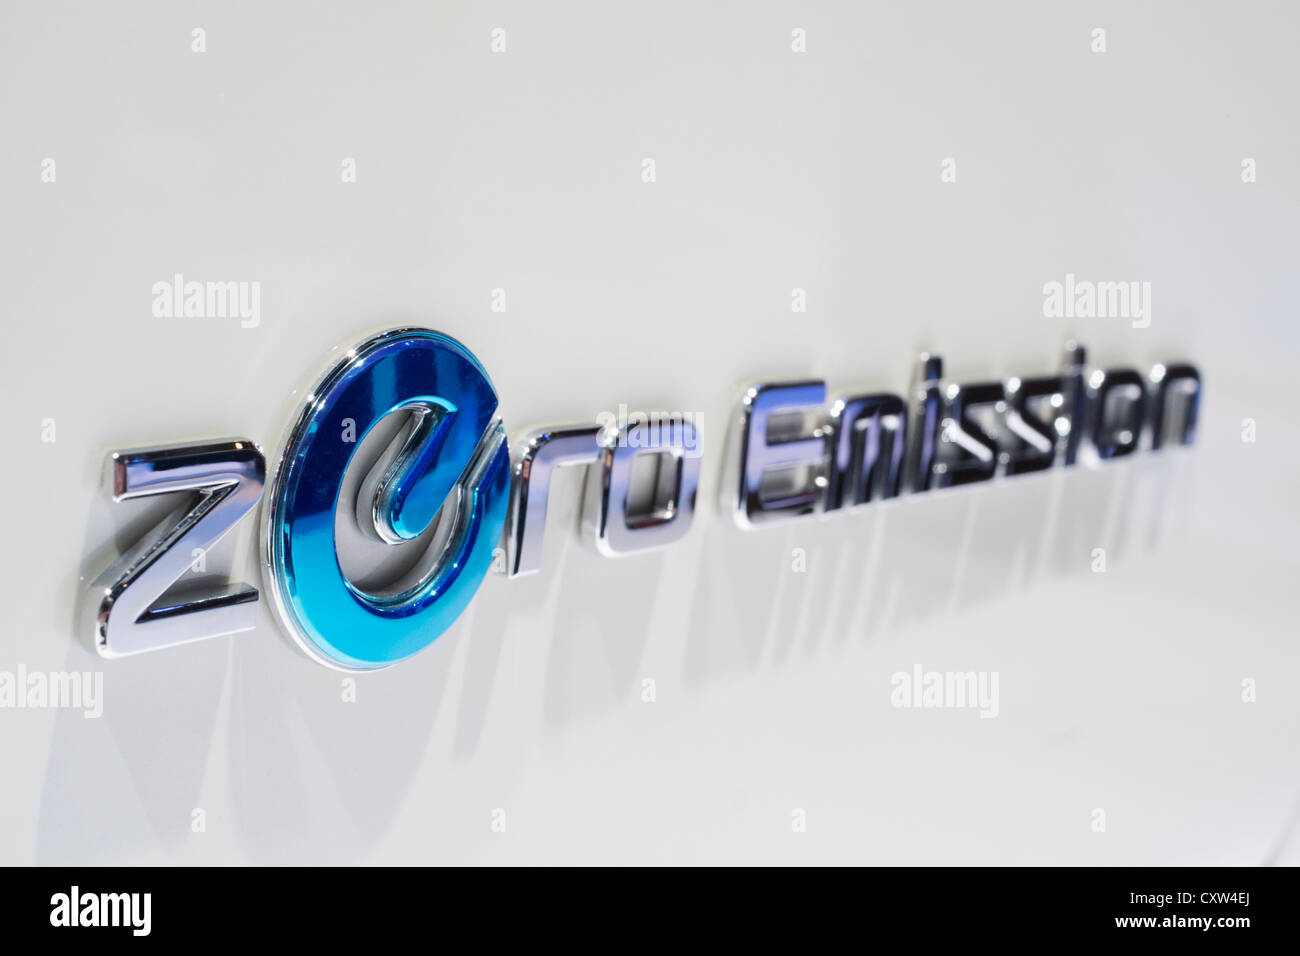 Detail of Zero Emission badge on electric Nissan car at Paris Motor Show 2012 Stock Photo